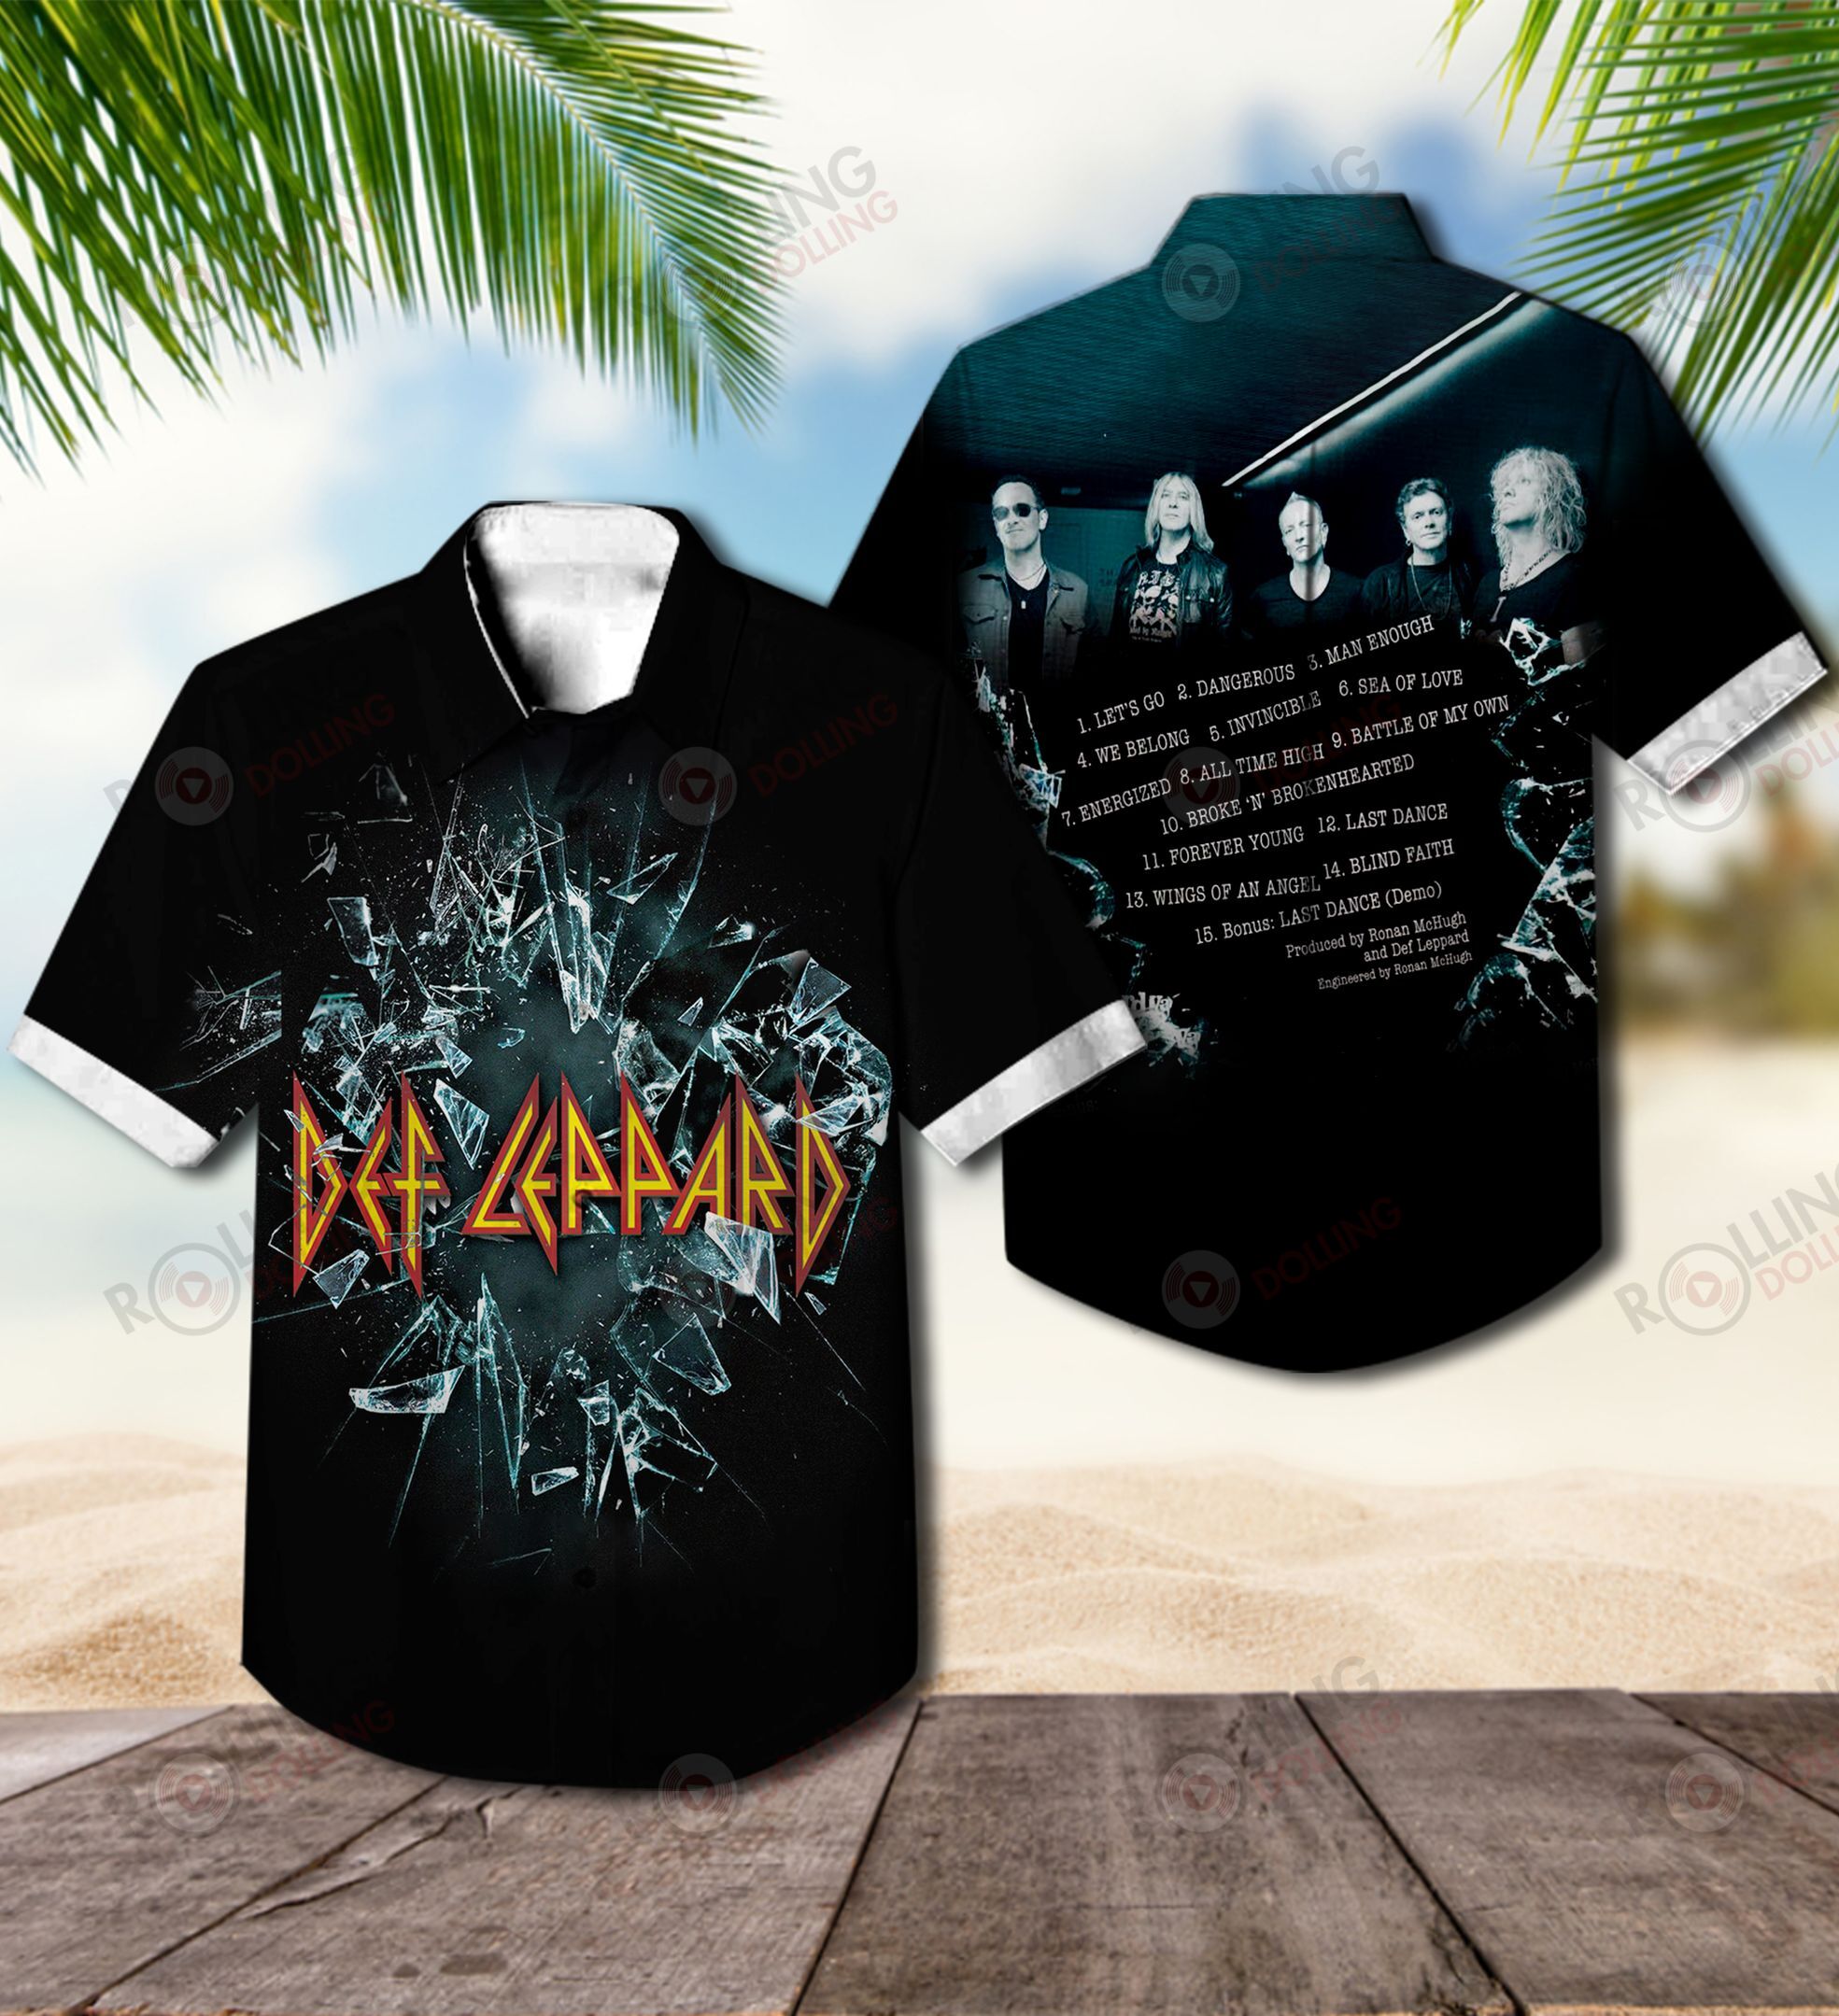 Check out these top 100+ Hawaiian shirt so cool for rock fans 405